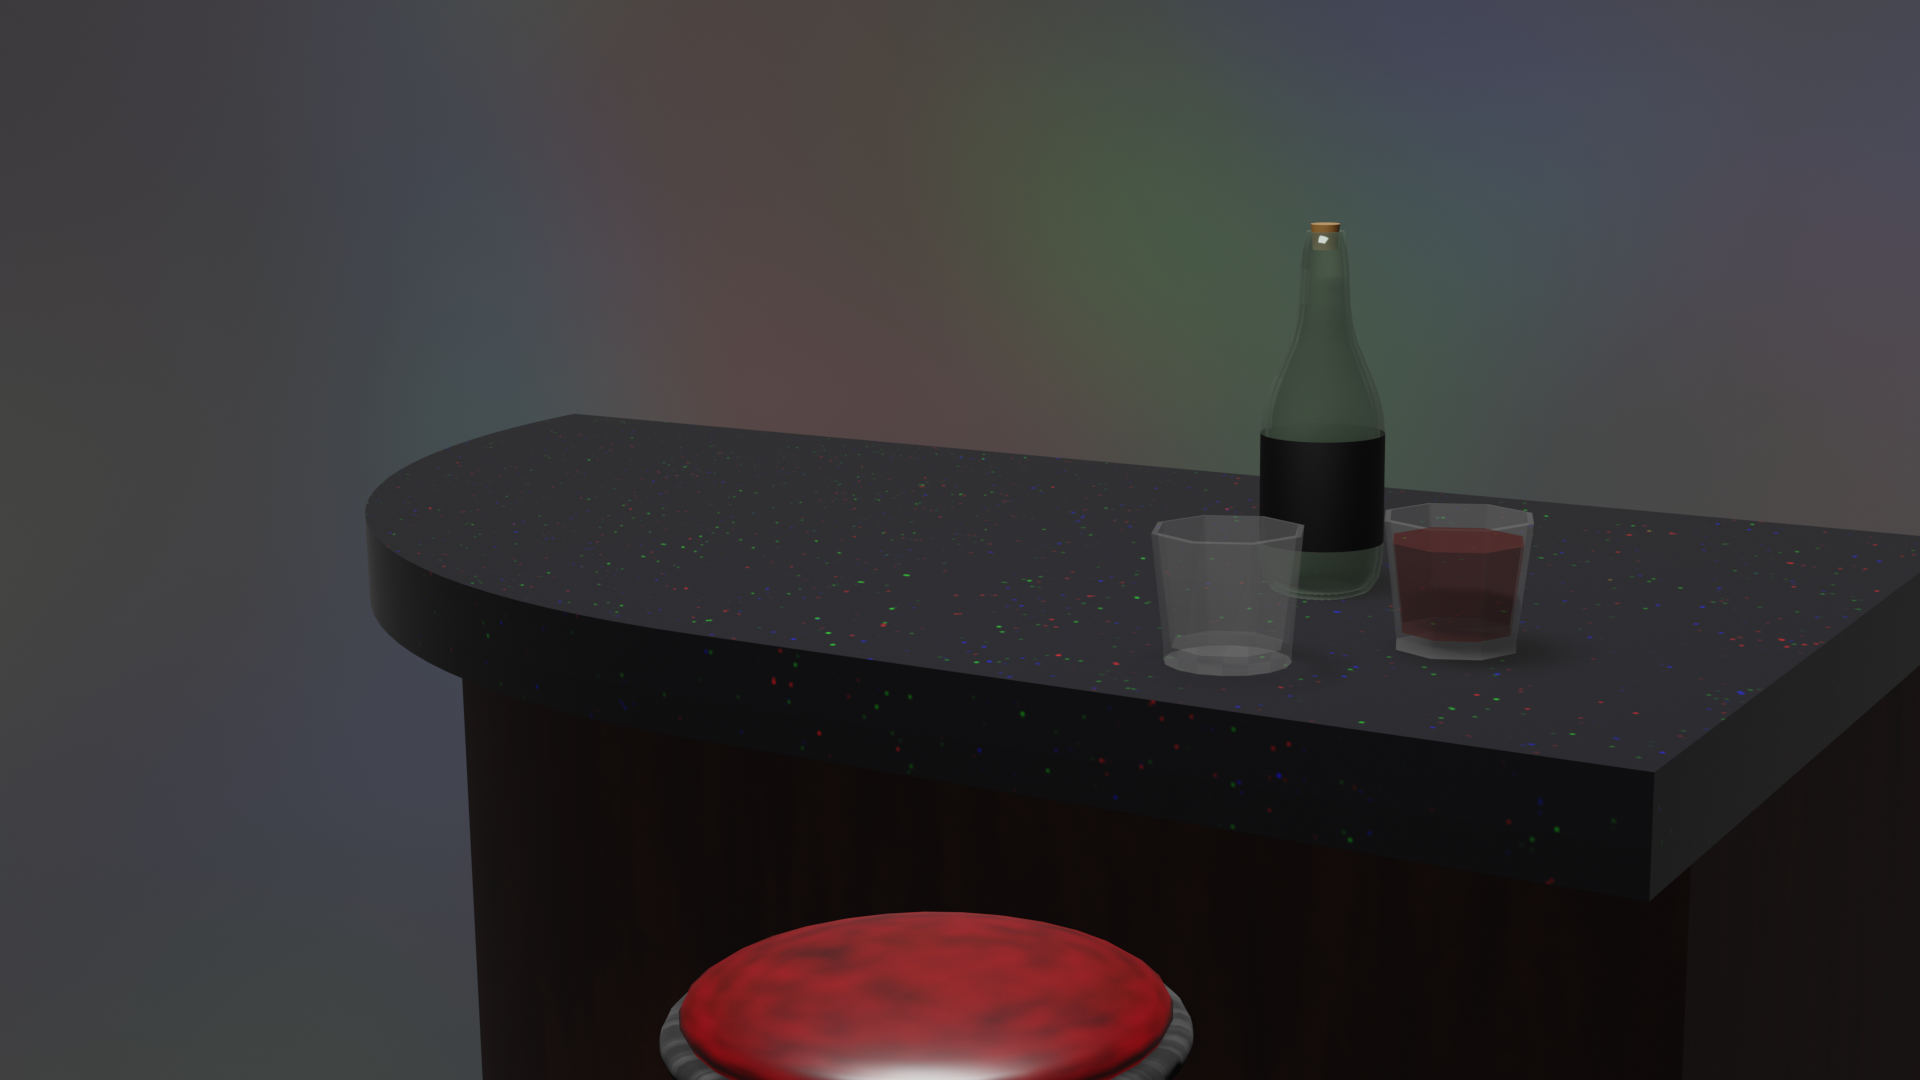 An assortment of objects you might find in a bar arranged in diorama; a countertop, two glasses, and a bottle.